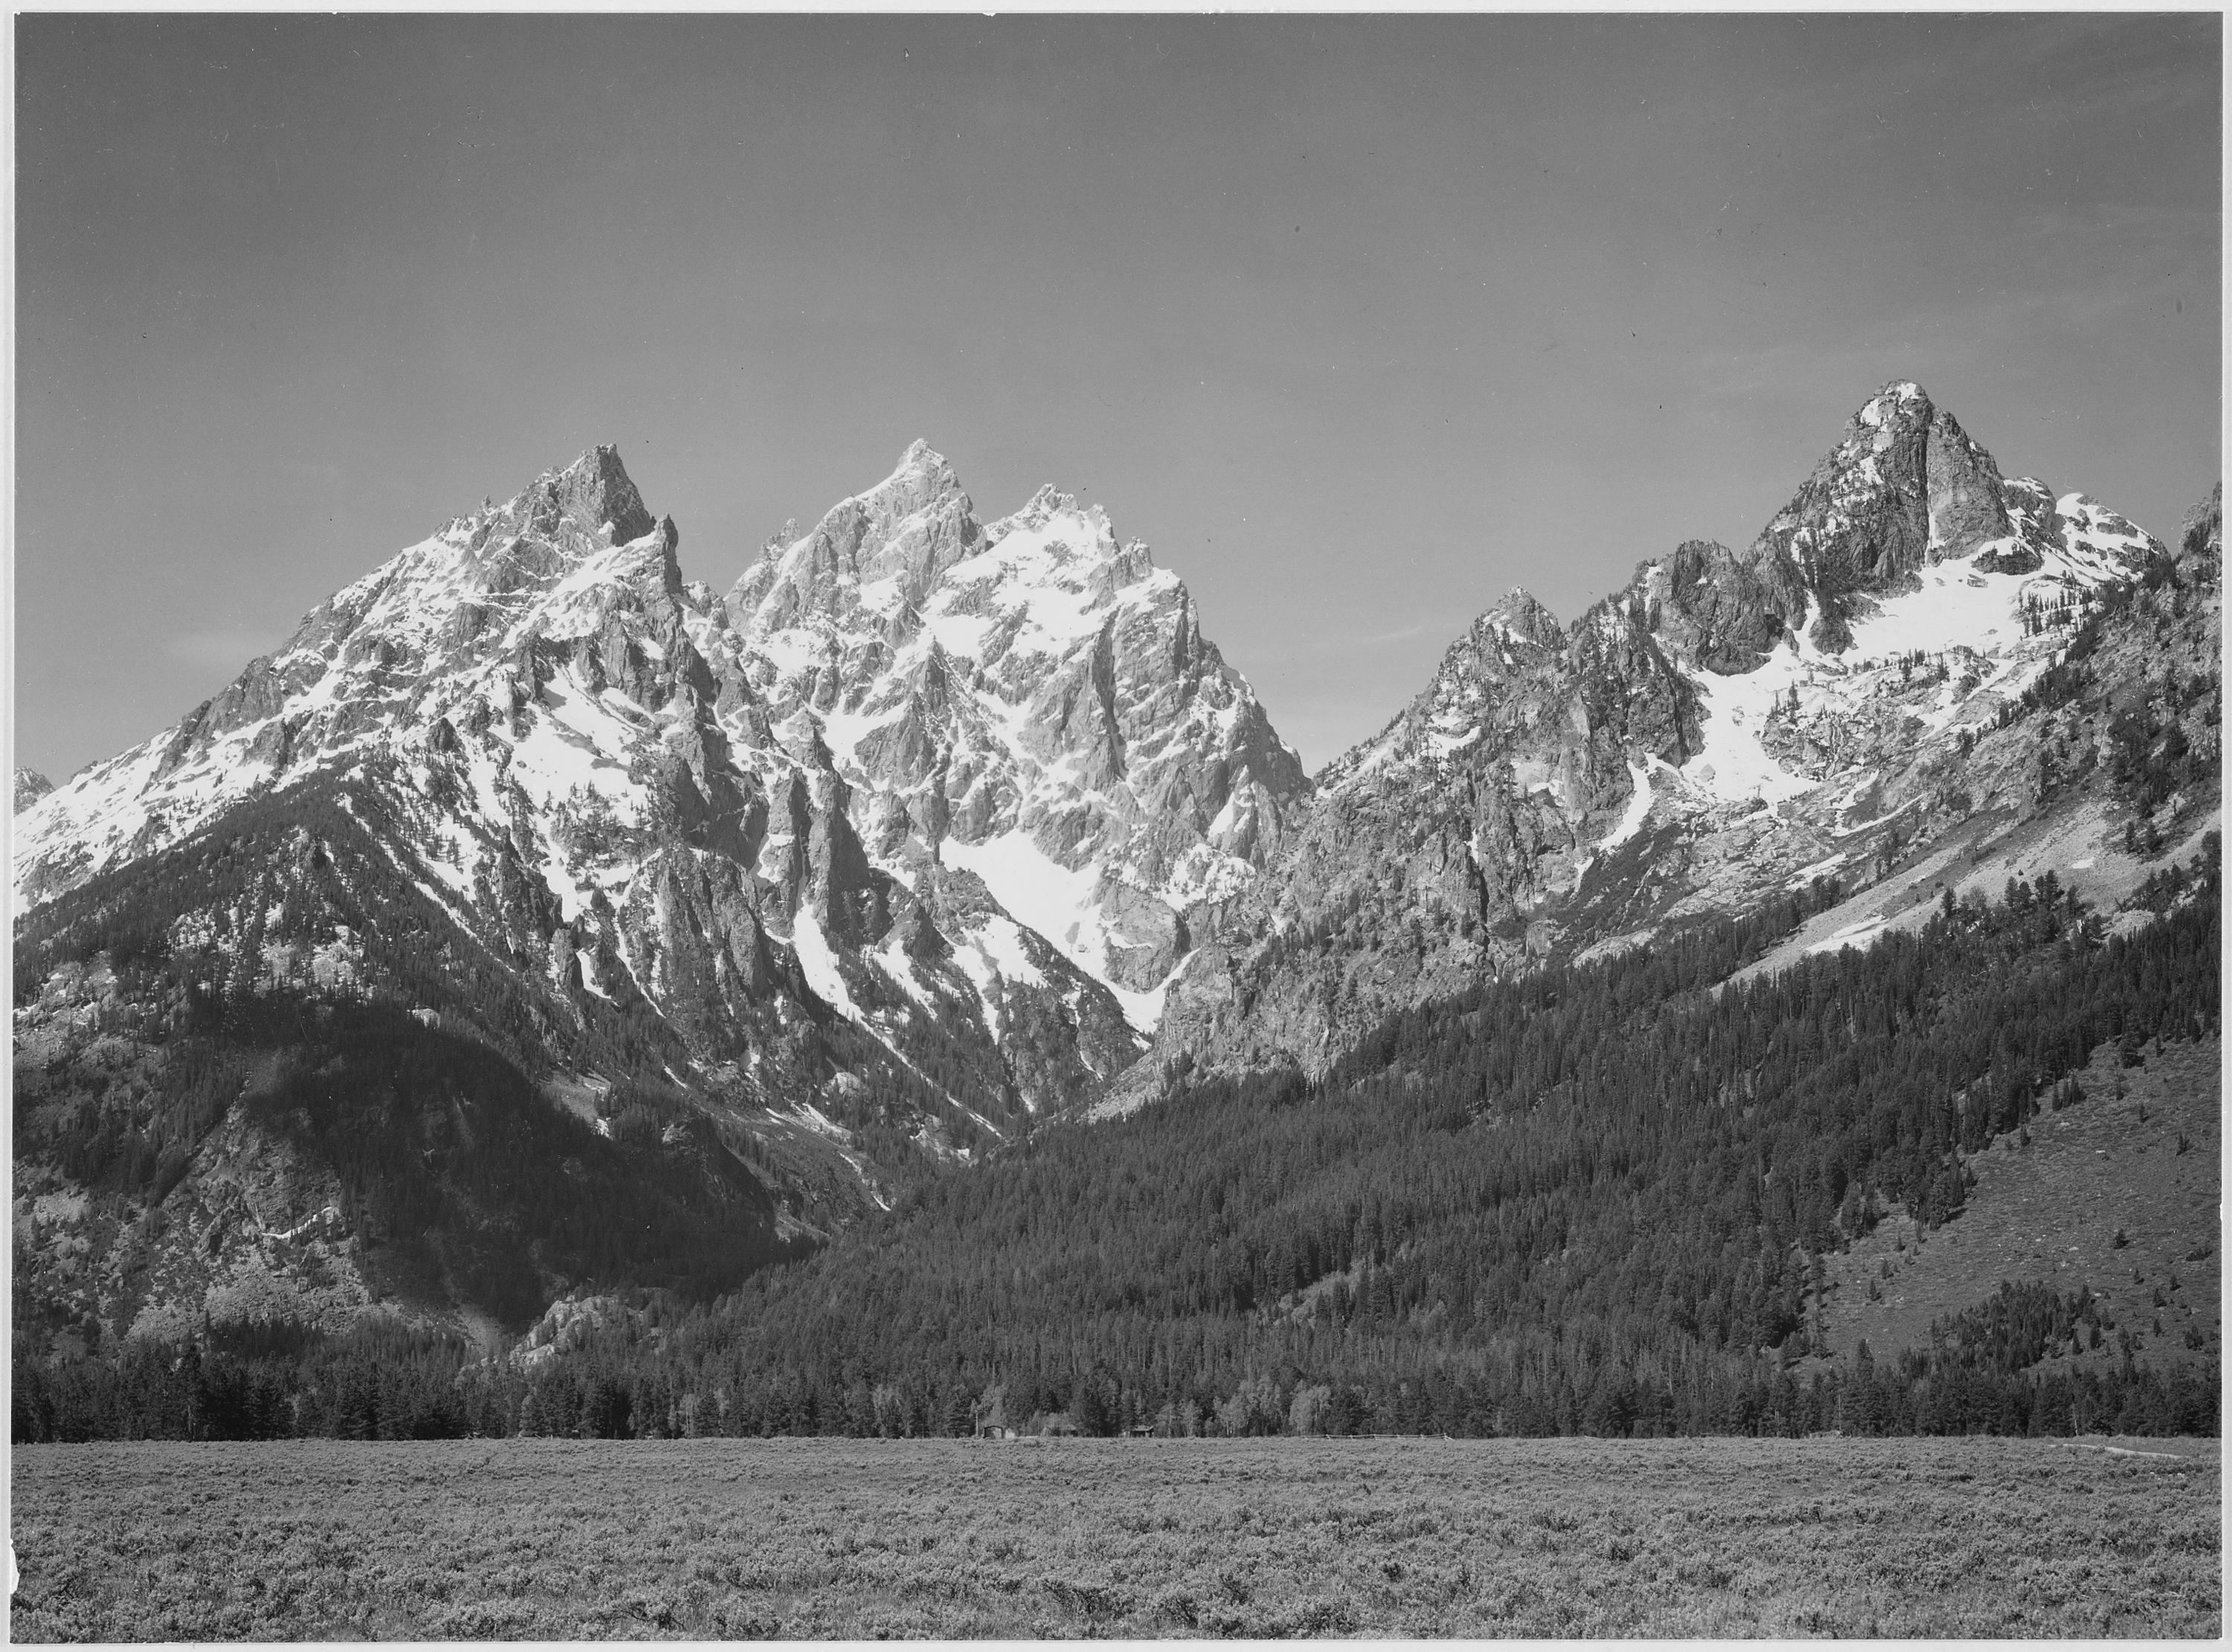 Ansel Adams - National Archives 79-AA-G11